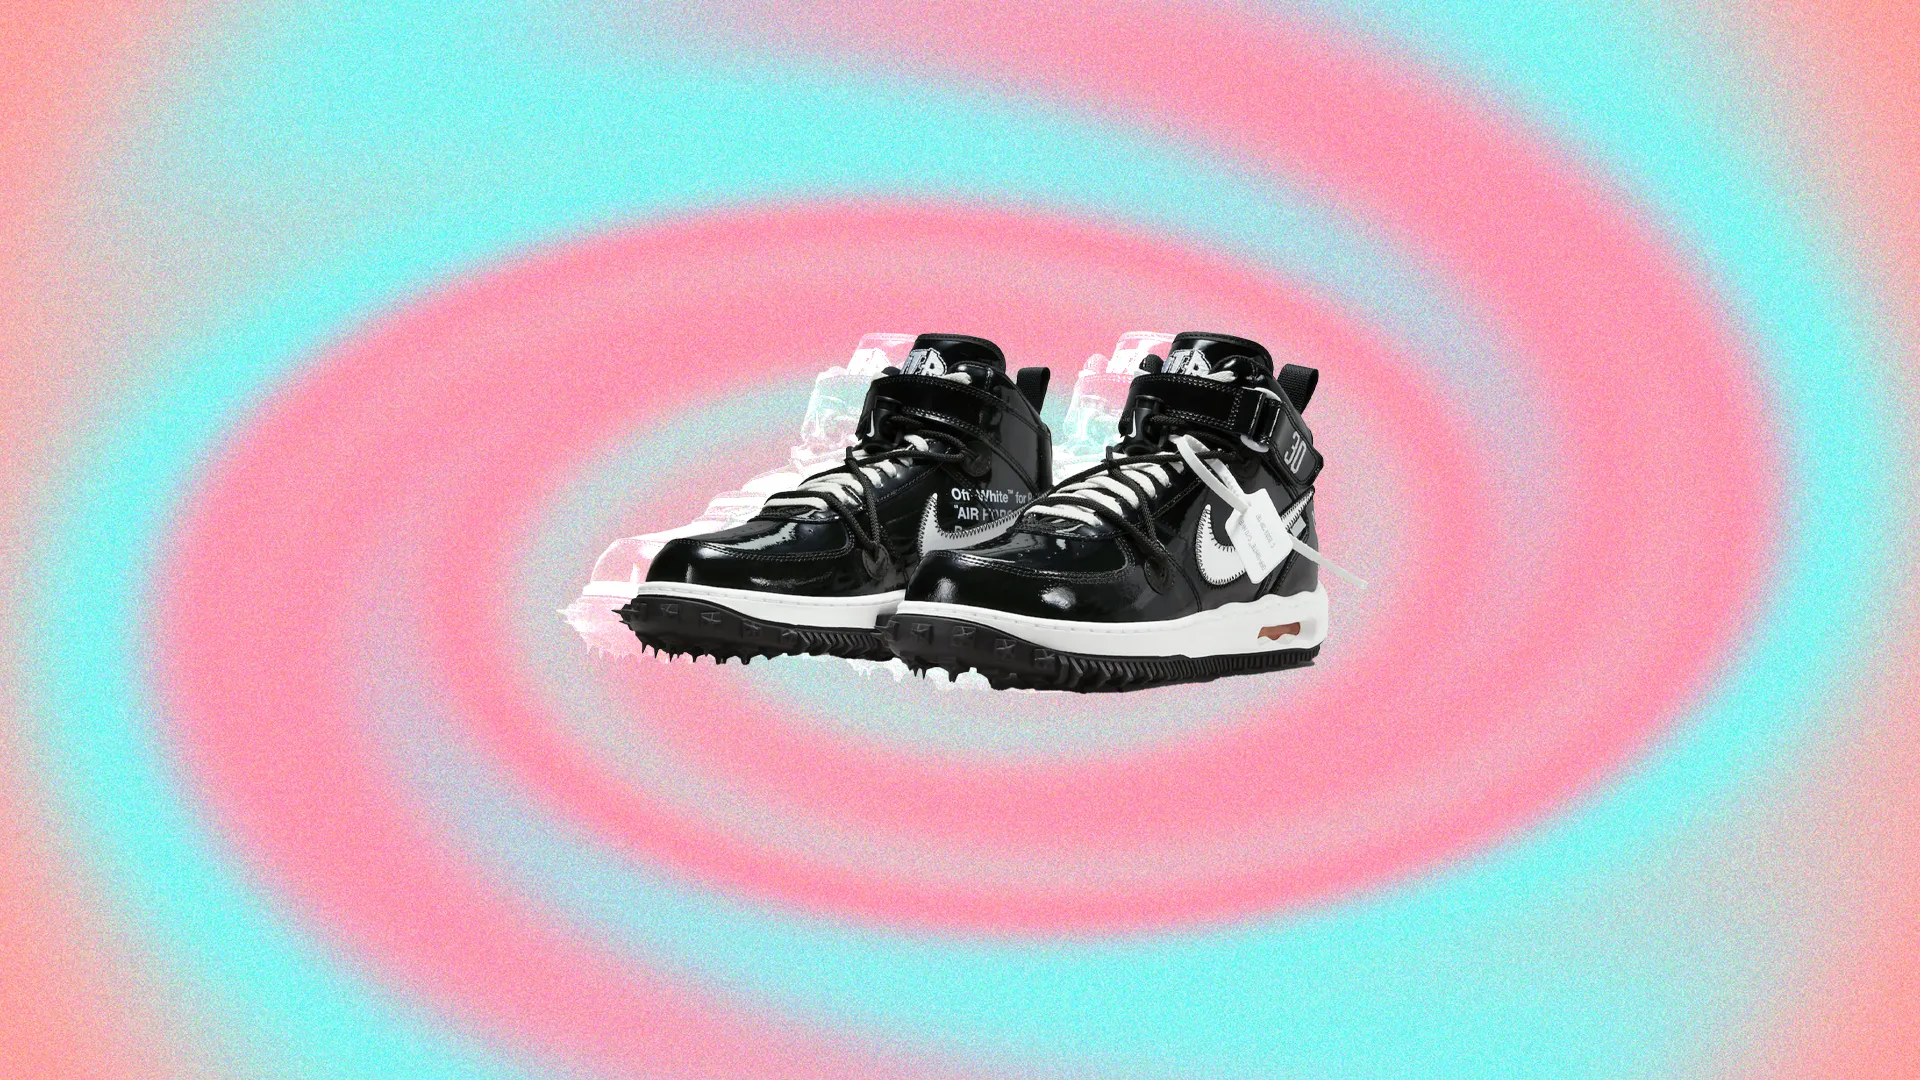 A pair of black Nike sneakers with white soles on a pink and blue background - Off-White